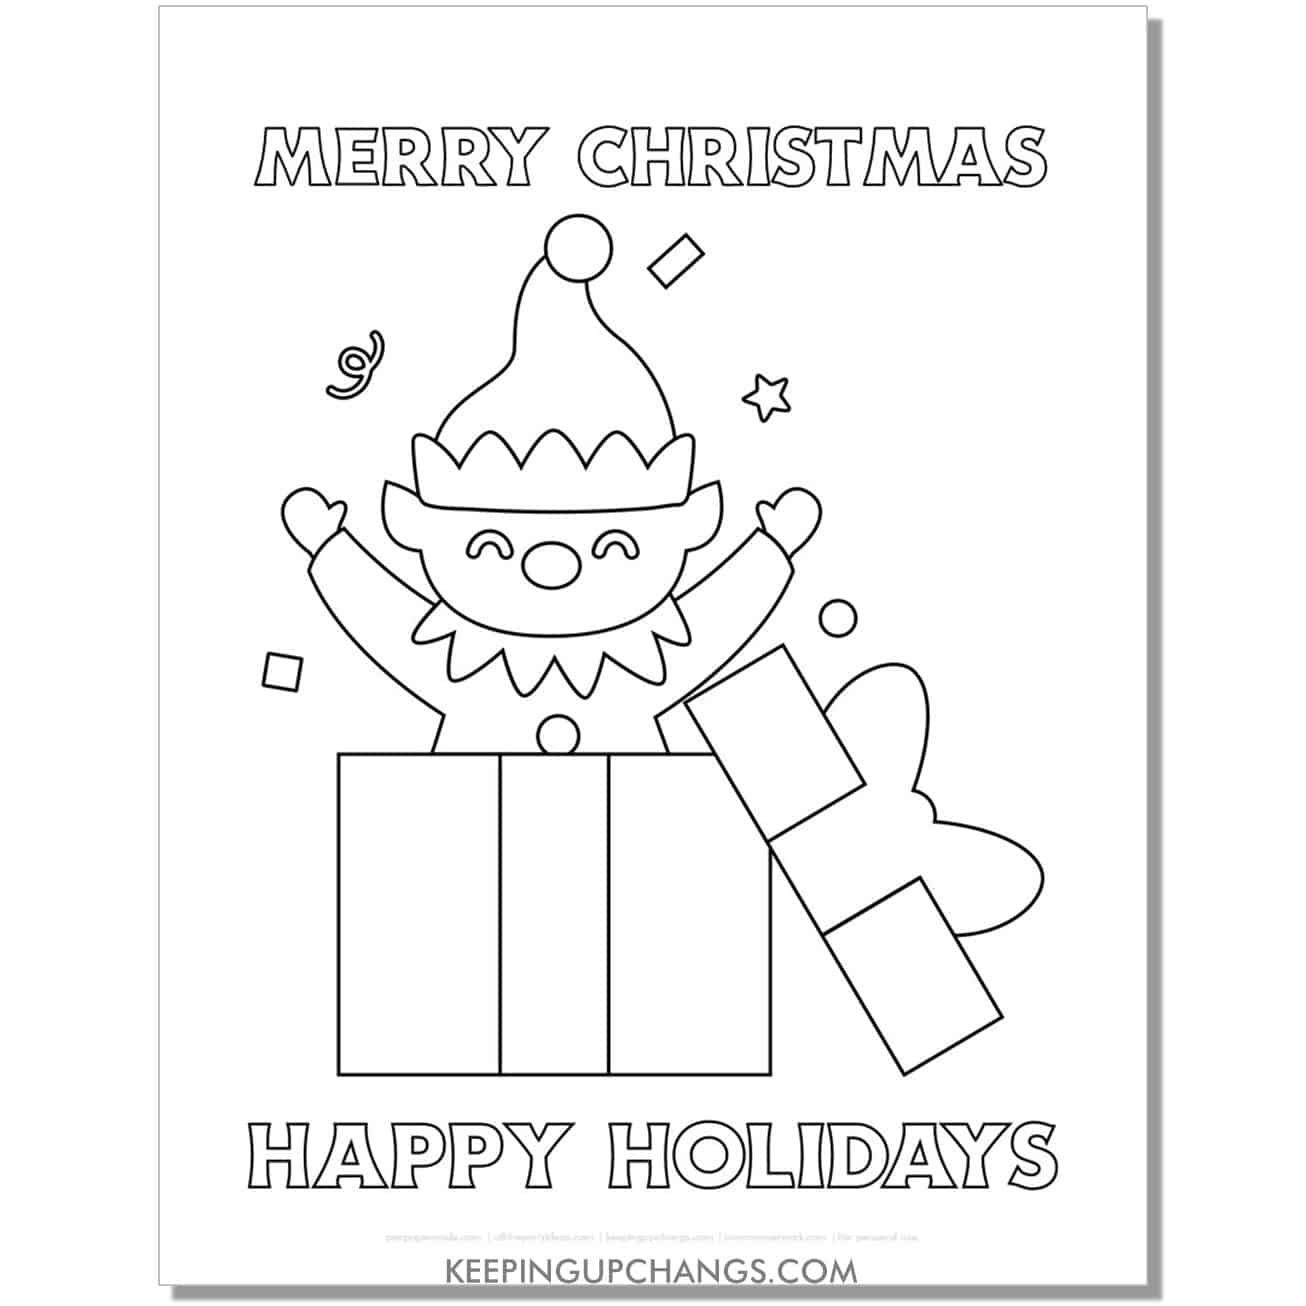 free merry christmas, happy holidays gift and elf coloring page for toddlers.